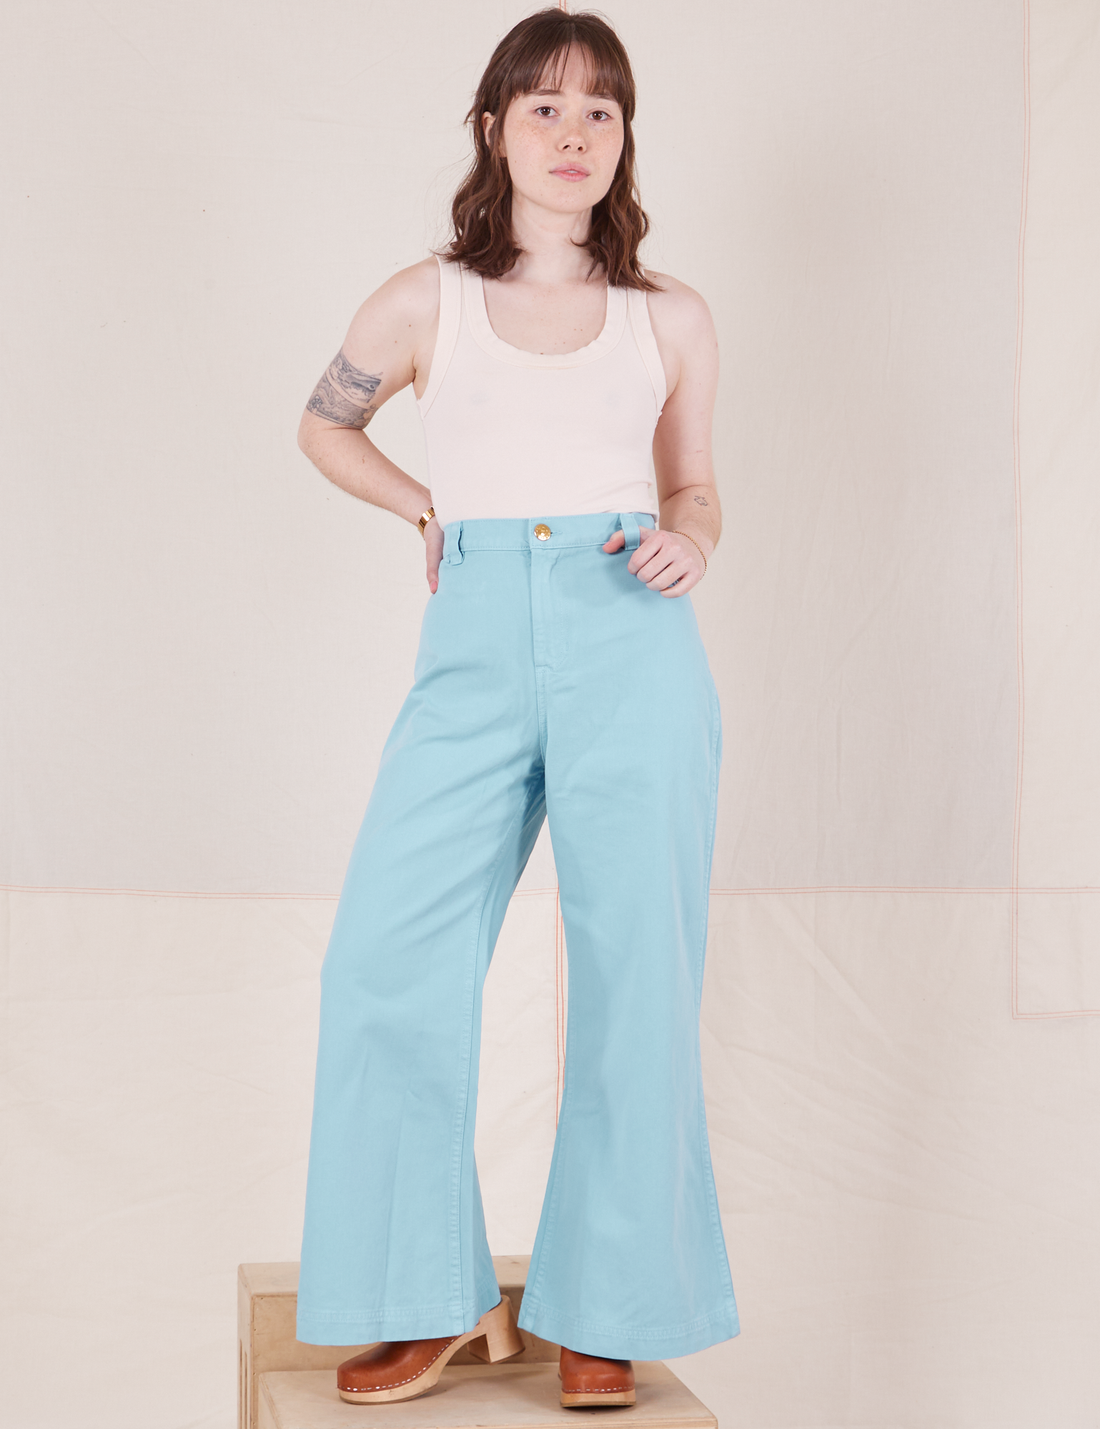 Hana is 5'3" and wearing XXS Bell Bottoms in Baby Blue paired with vintage off-white Tank Top